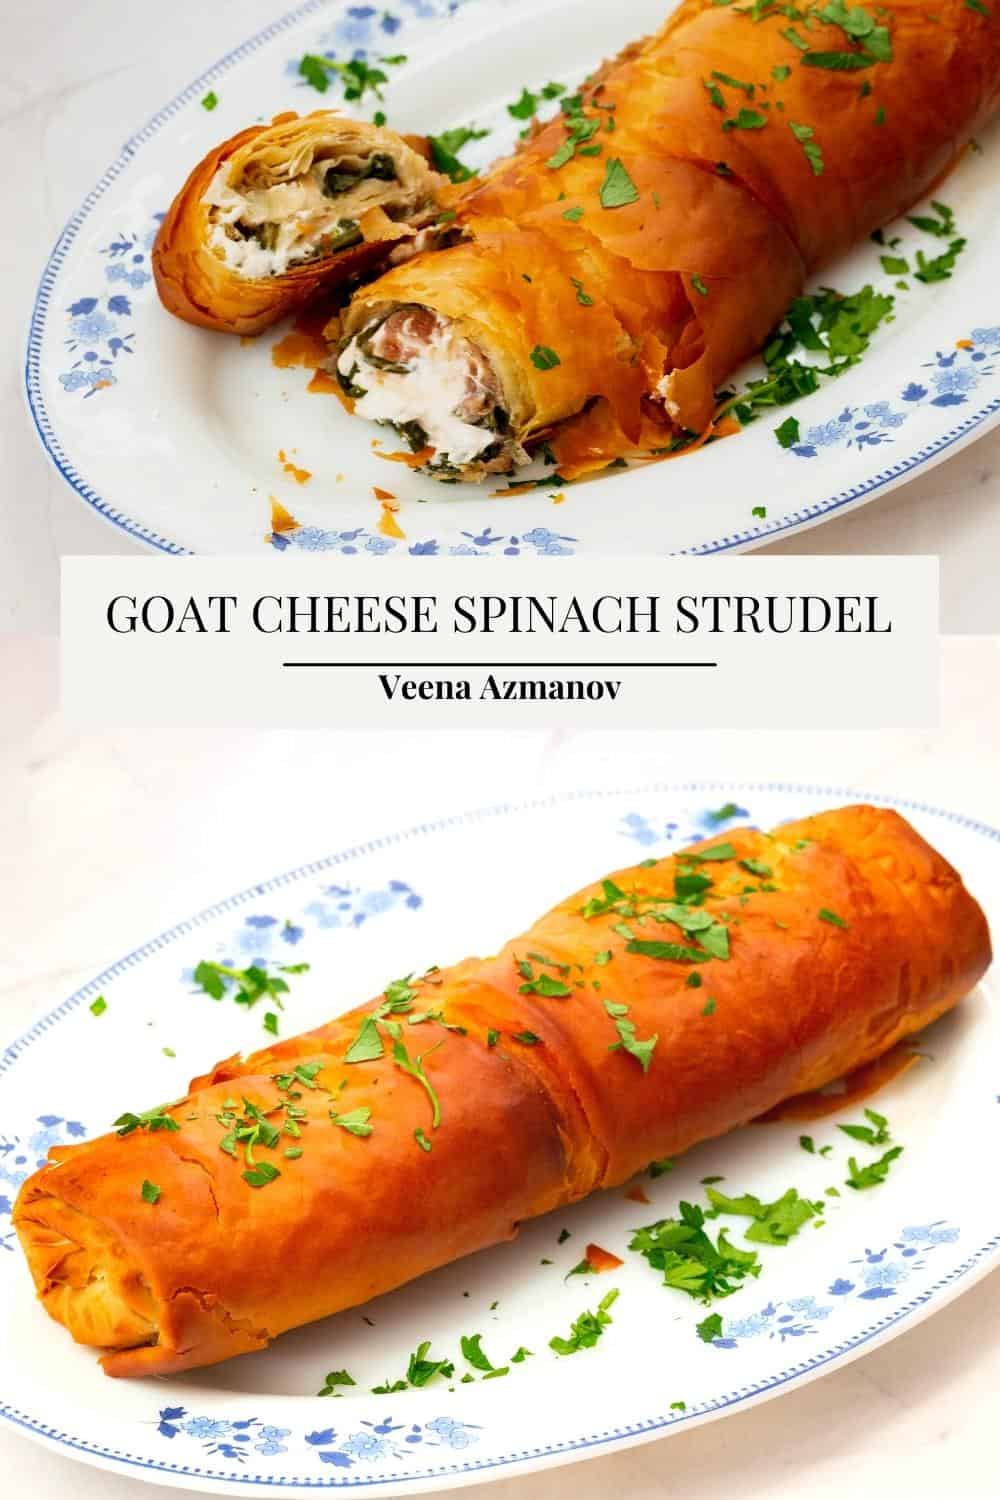 Pinterest image for strudel with spinach and goat cheese.